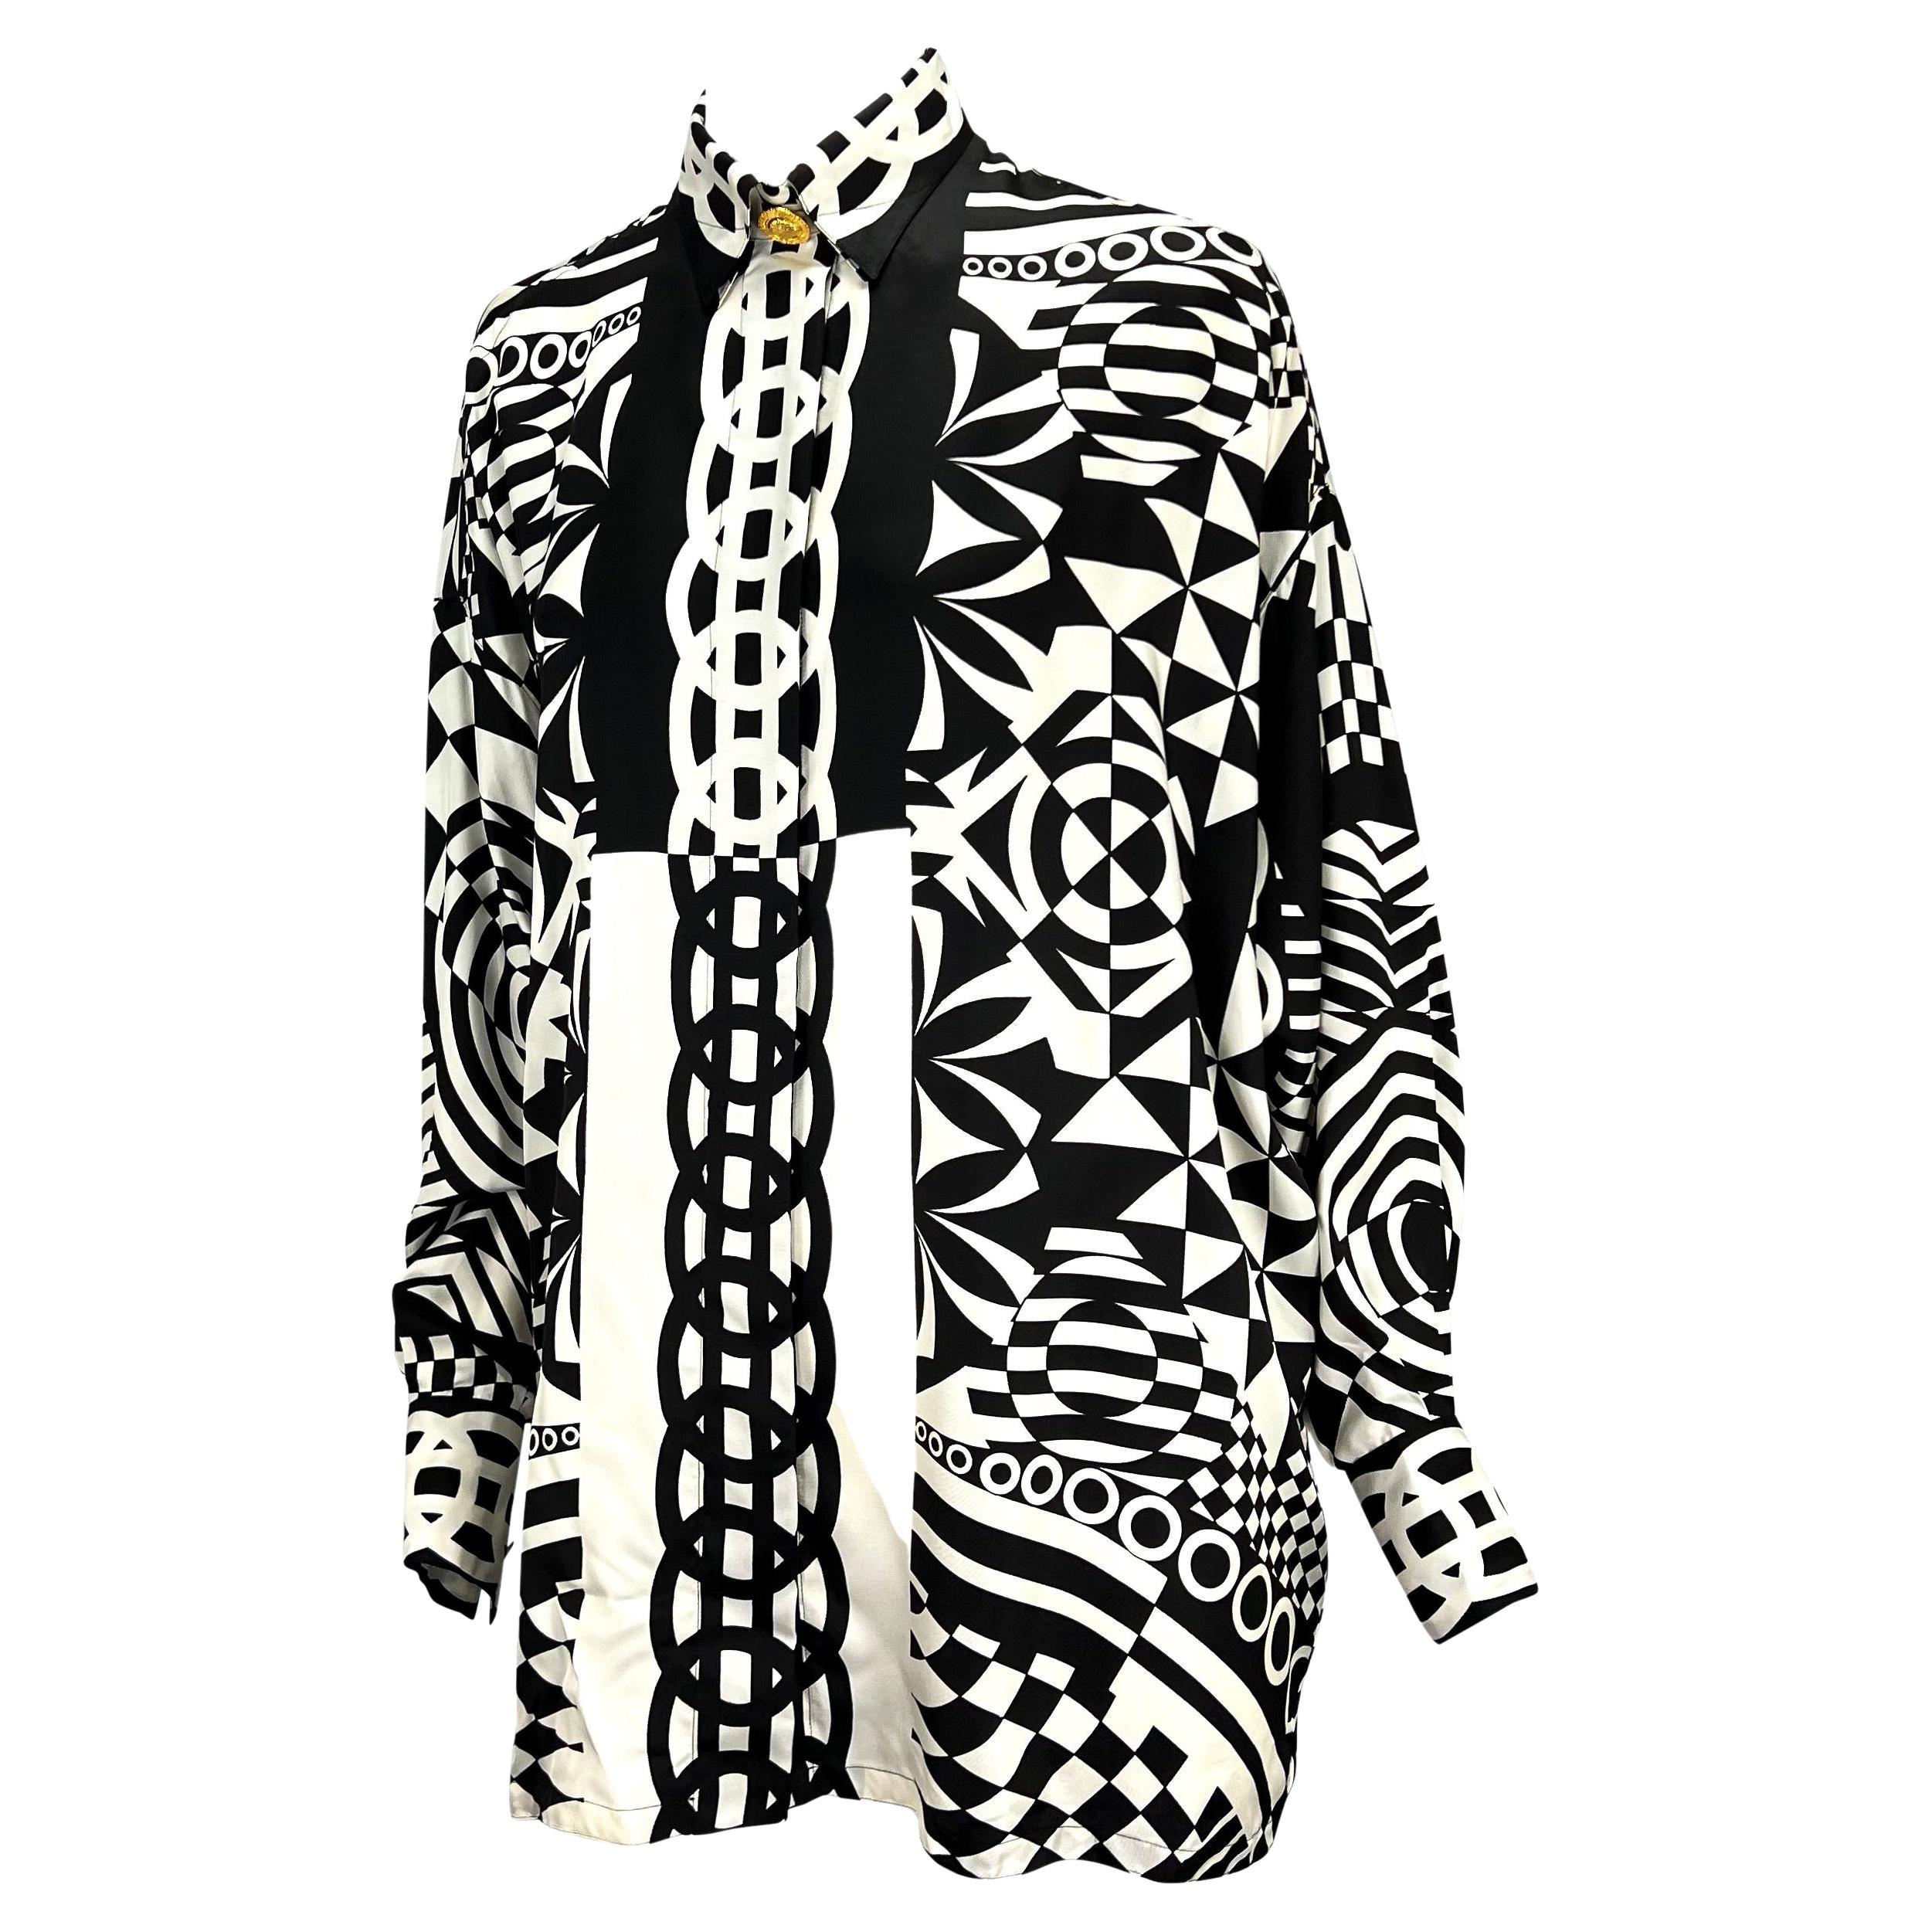 Presenting a stunning monochromatic silk Gianni Versace Couture shirt, designed by Gianni Versace. From the Spring/Summer 1992 collection, this black and white silk button-up top features geometric optical art designs throughout. Made complete with